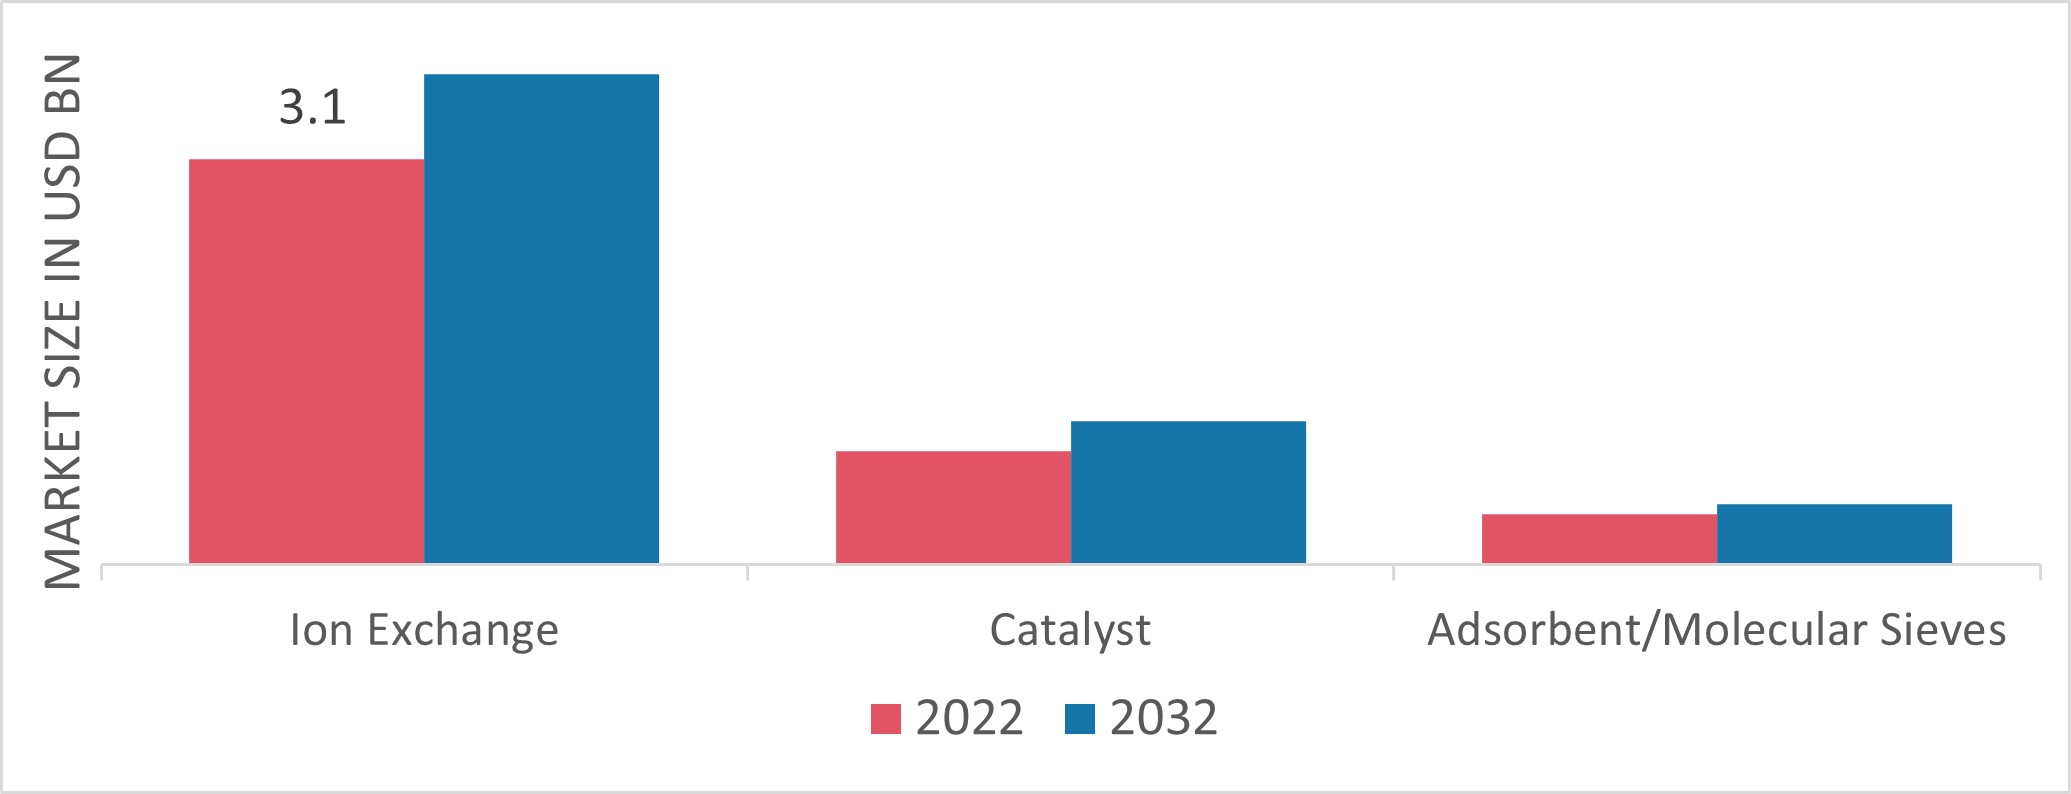 Synthetic Zeolites Market, by Function, 2022 & 2032